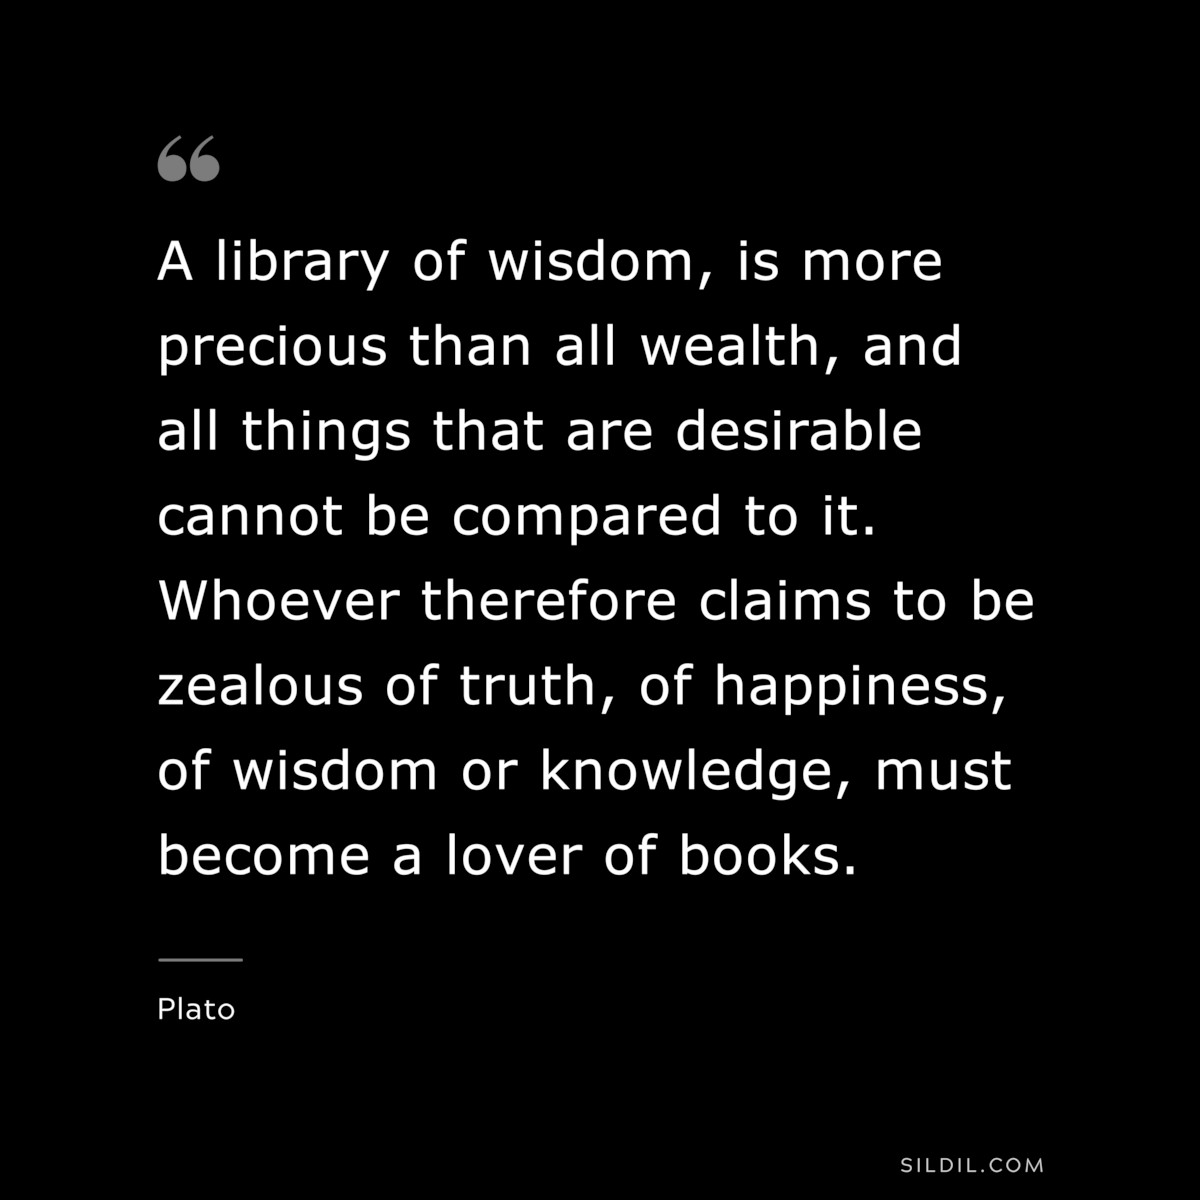 A library of wisdom, is more precious than all wealth, and all things that are desirable cannot be compared to it. Whoever therefore claims to be zealous of truth, of happiness, of wisdom or knowledge, must become a lover of books. ― Plato